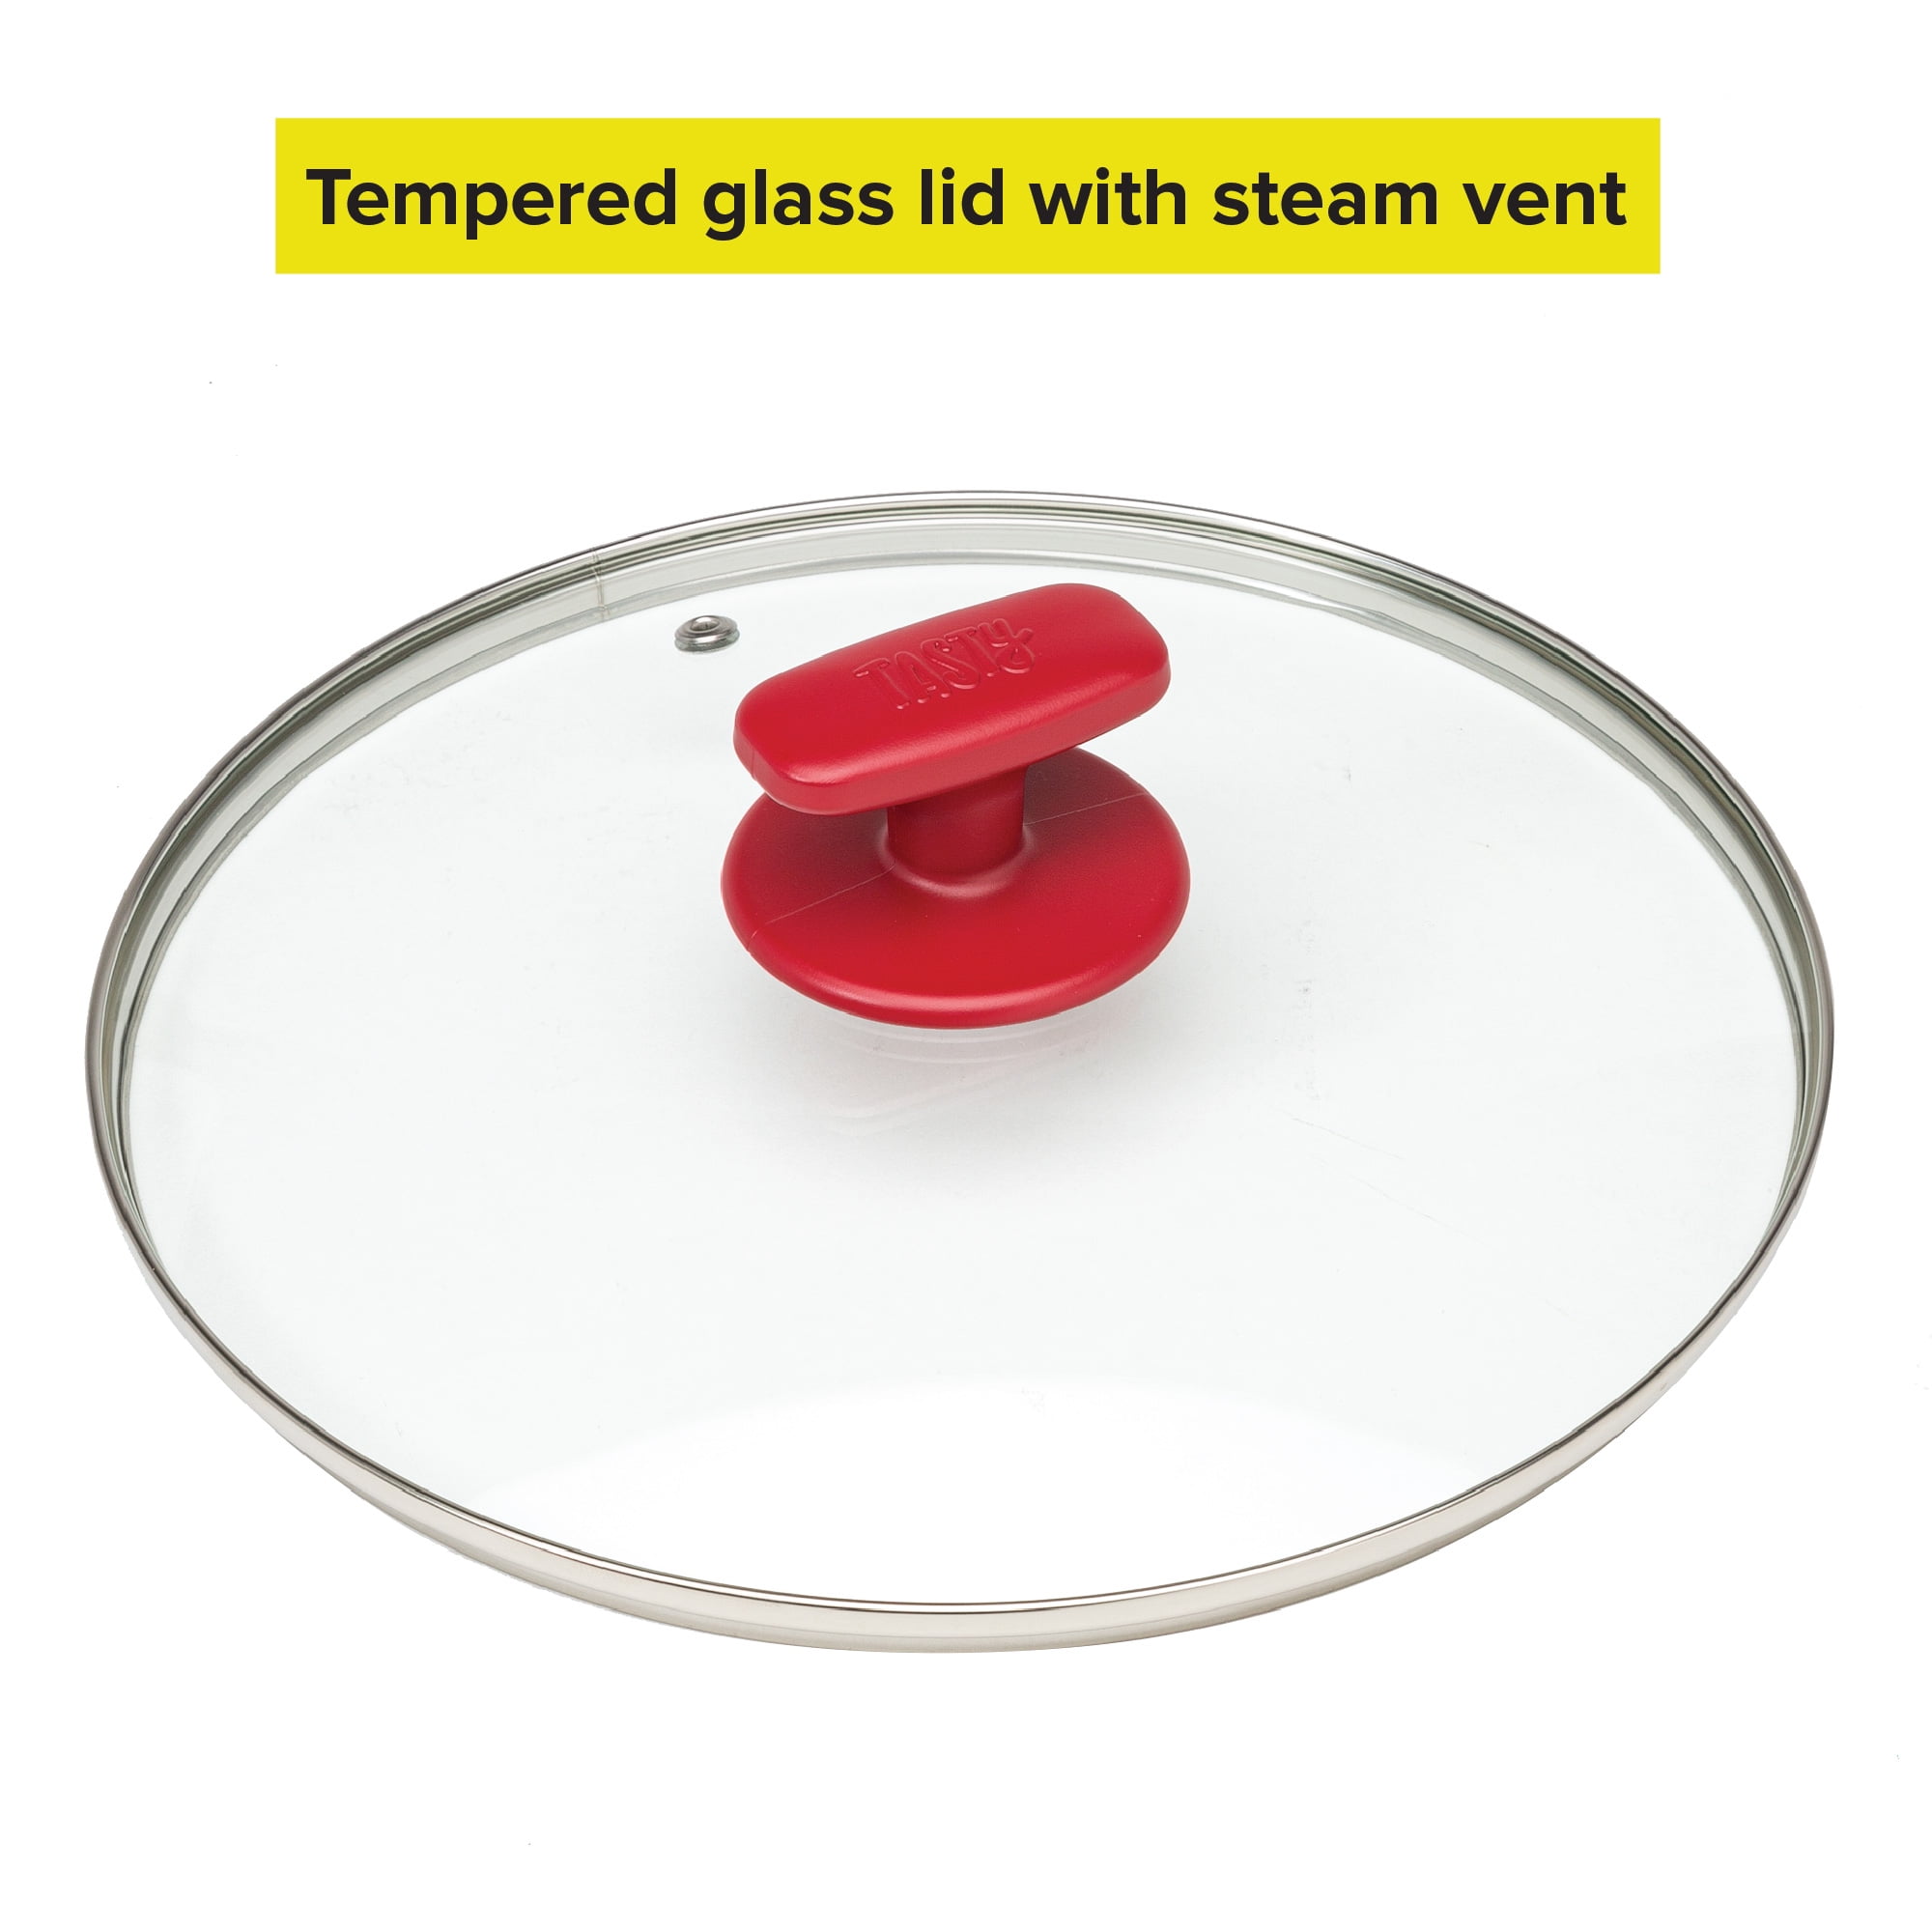 Tasty Ceramic Titanium-Reinforced Non-Stick Centerpiece Pan with Glass Lid,  Red, 14 